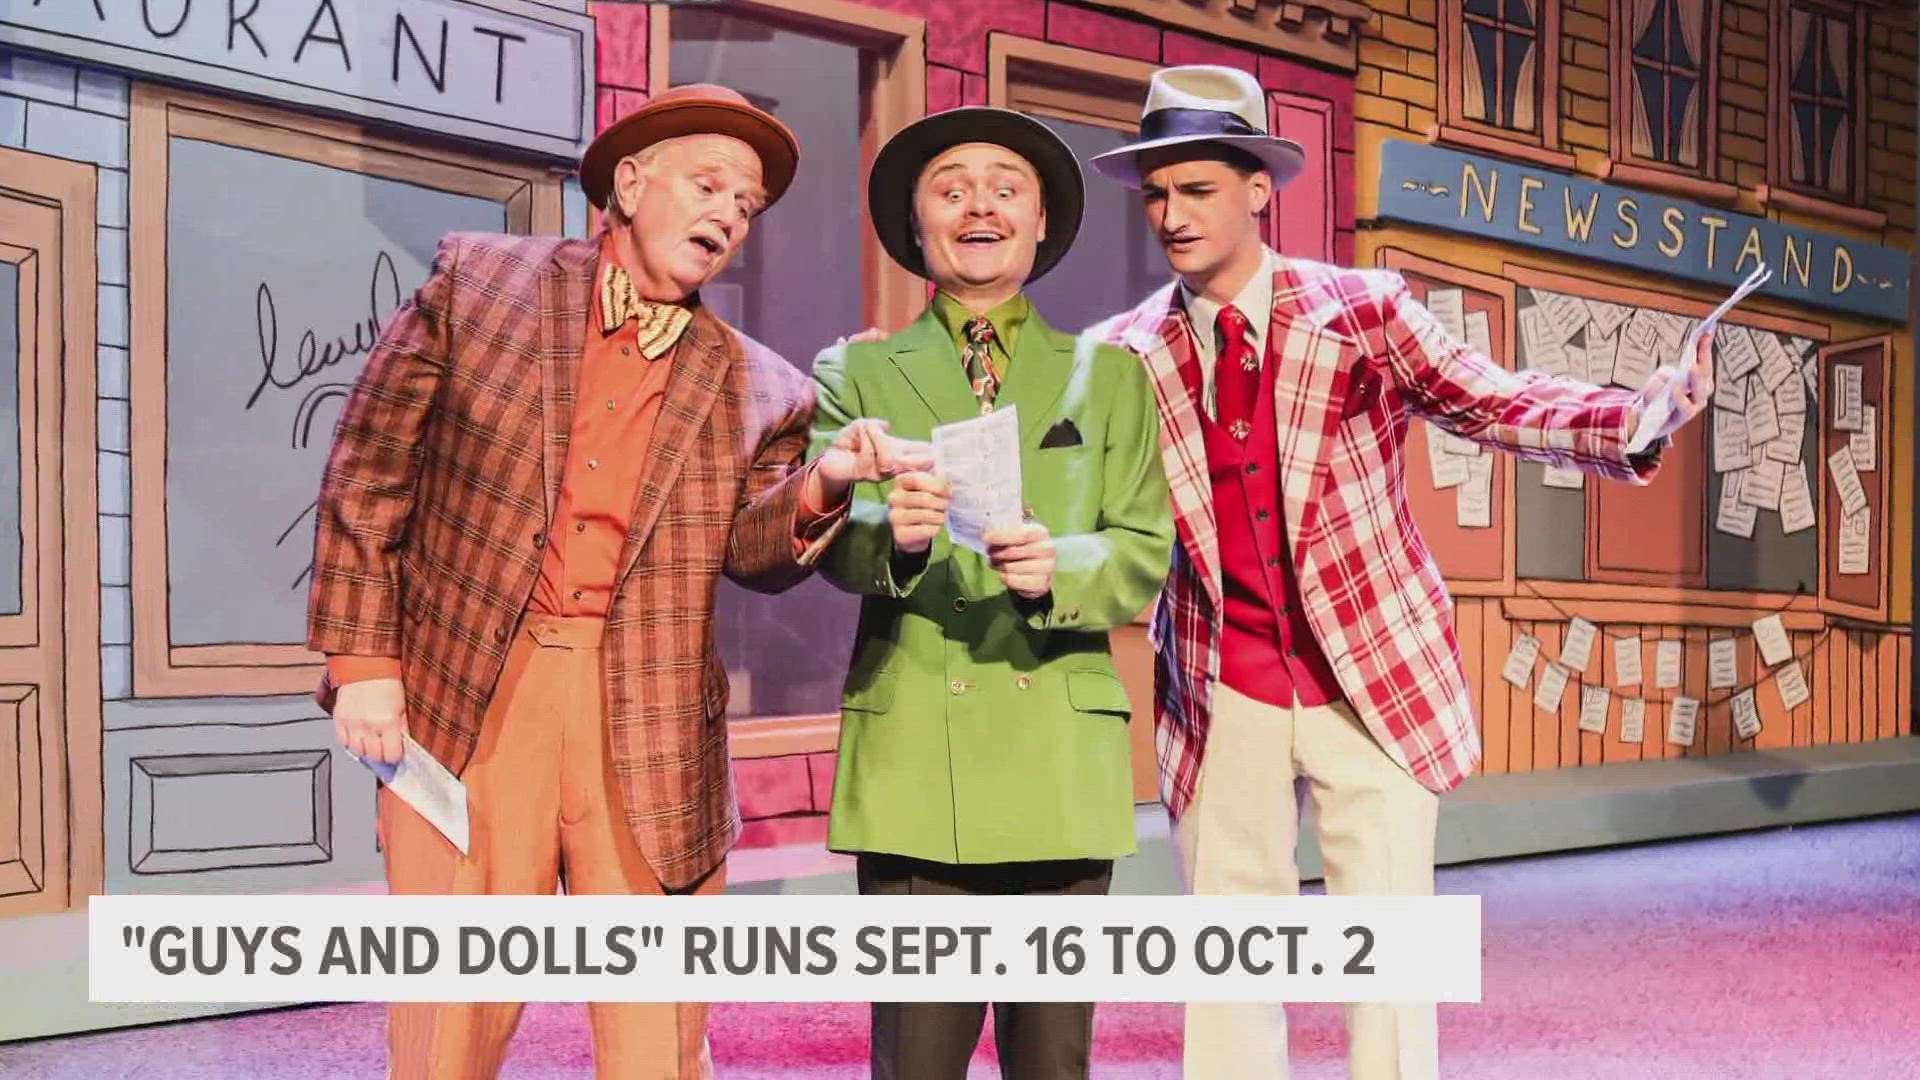 This will be the playhouse's 104th season. The show runs Sept. 16 - Oct. 2.